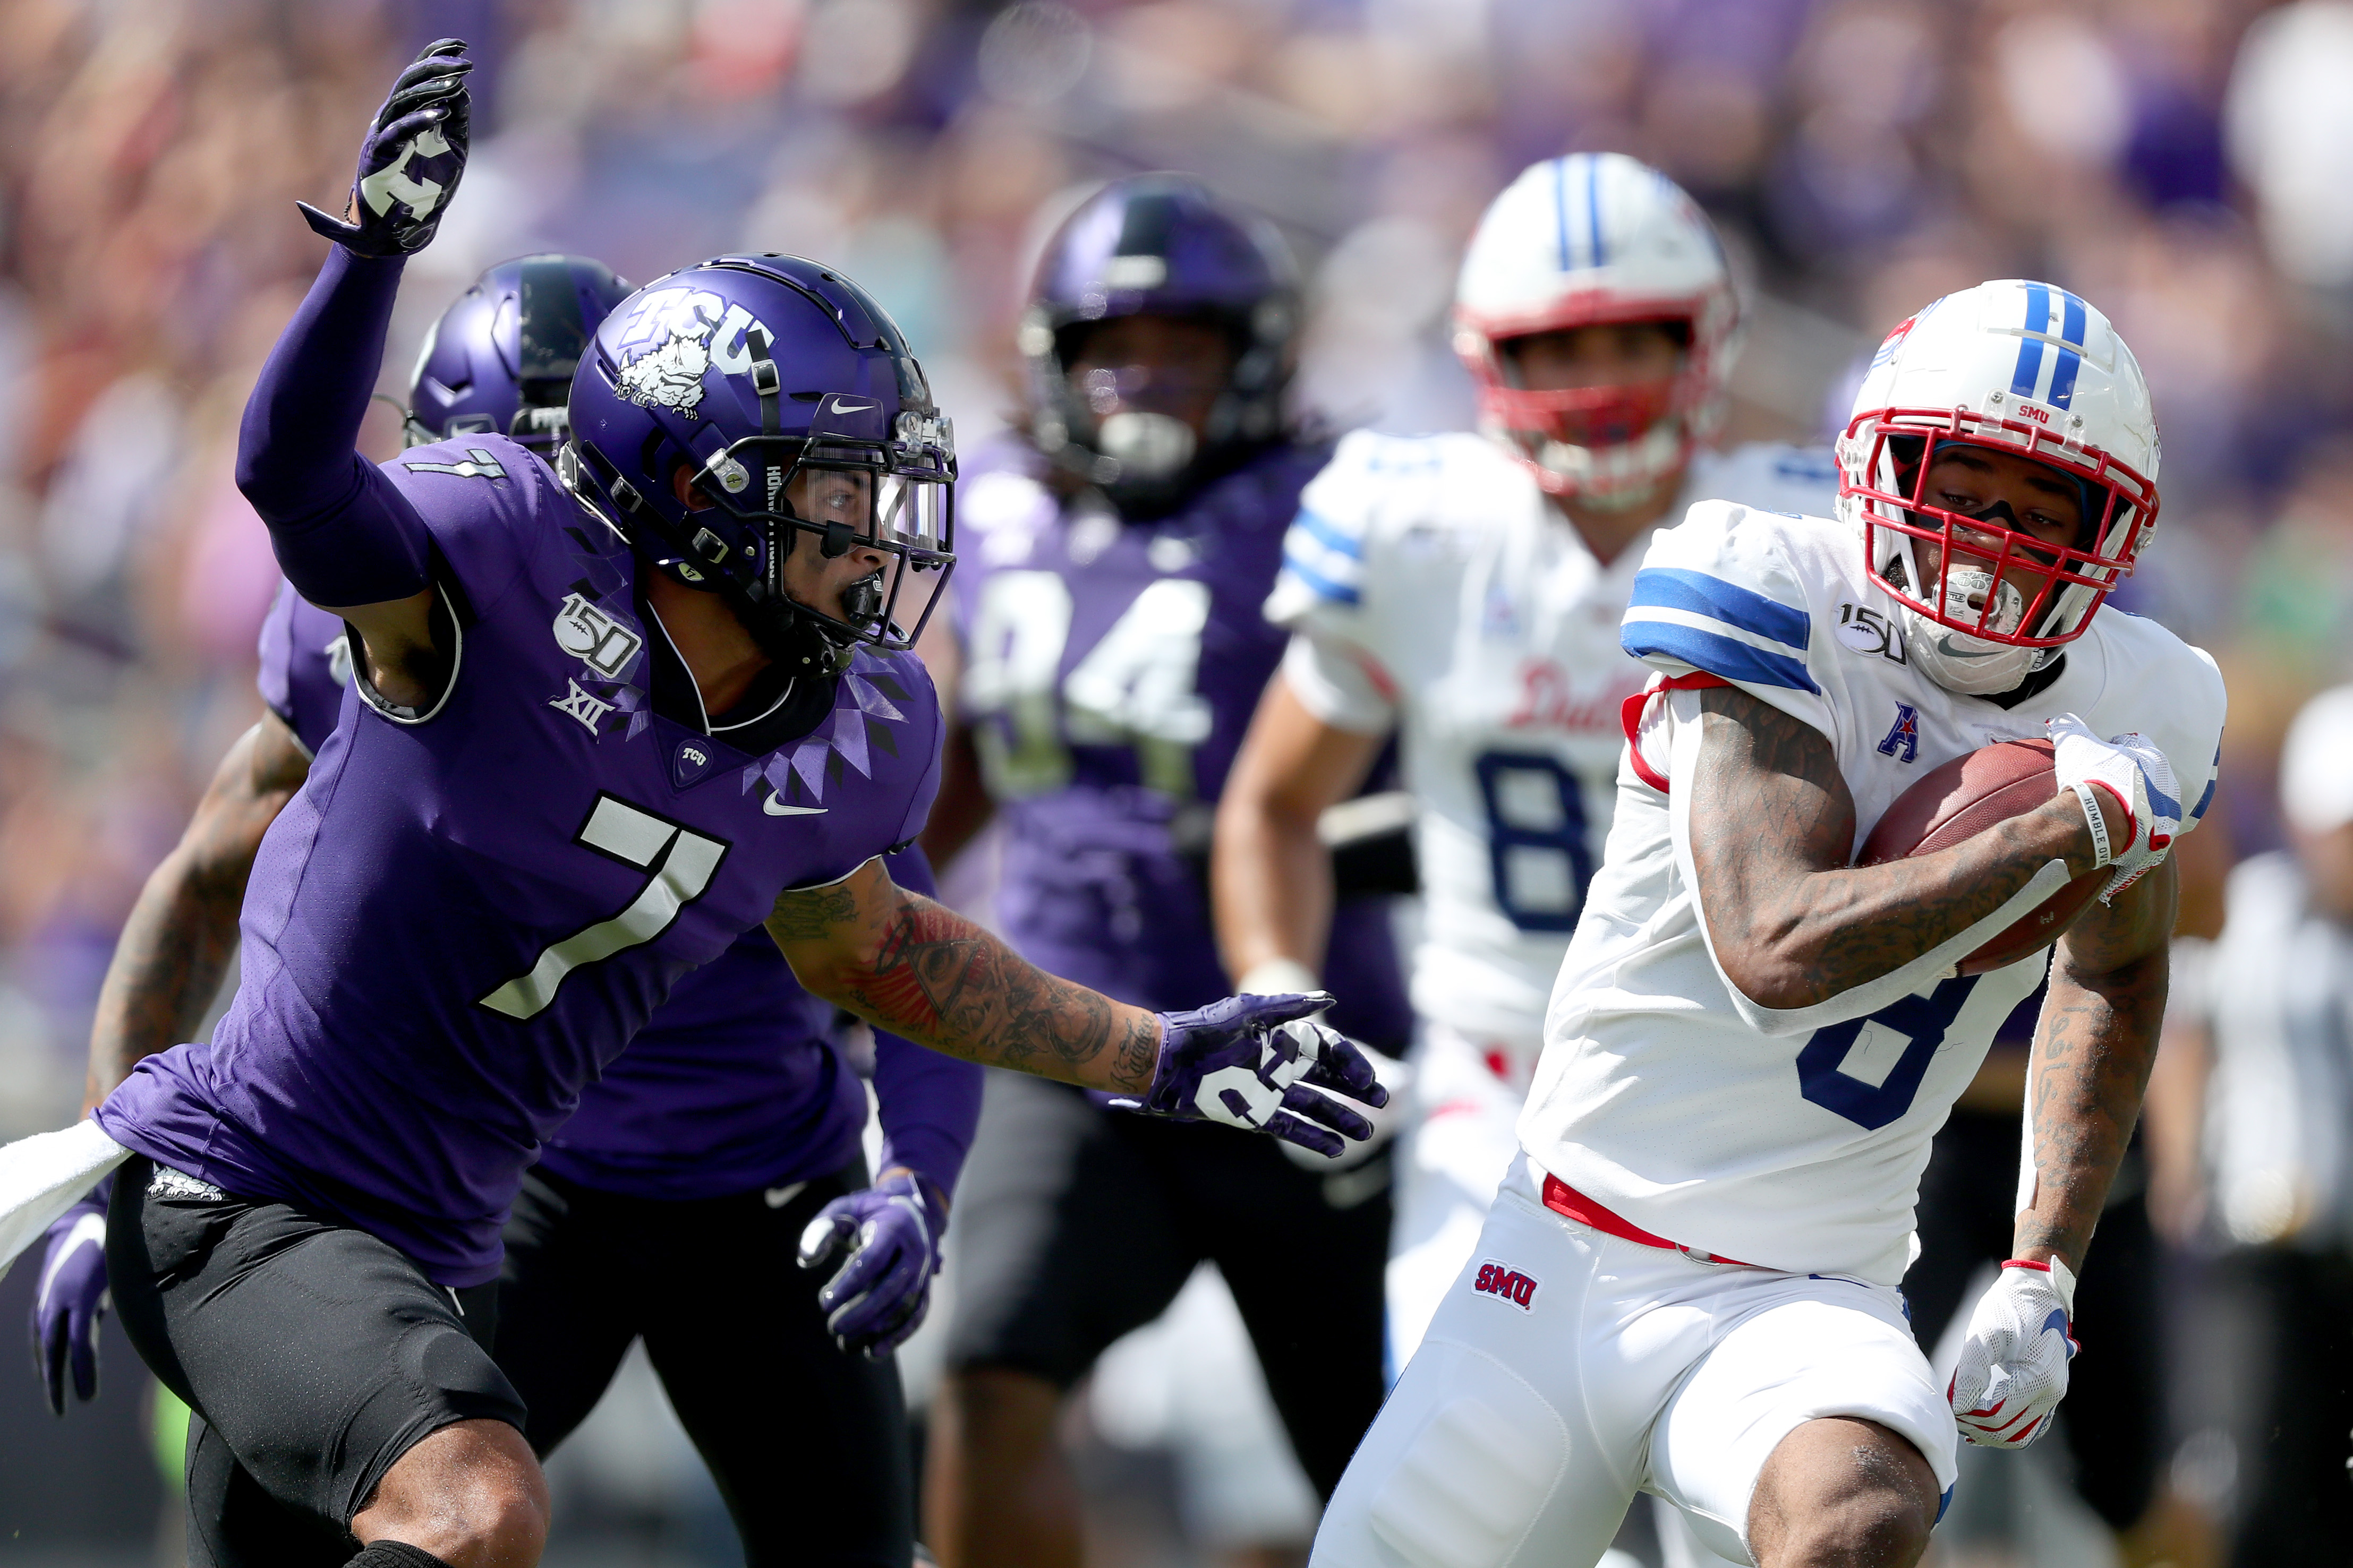 Trevon Moehrig Safety TCU  NFL Draft Profile & Scouting Report